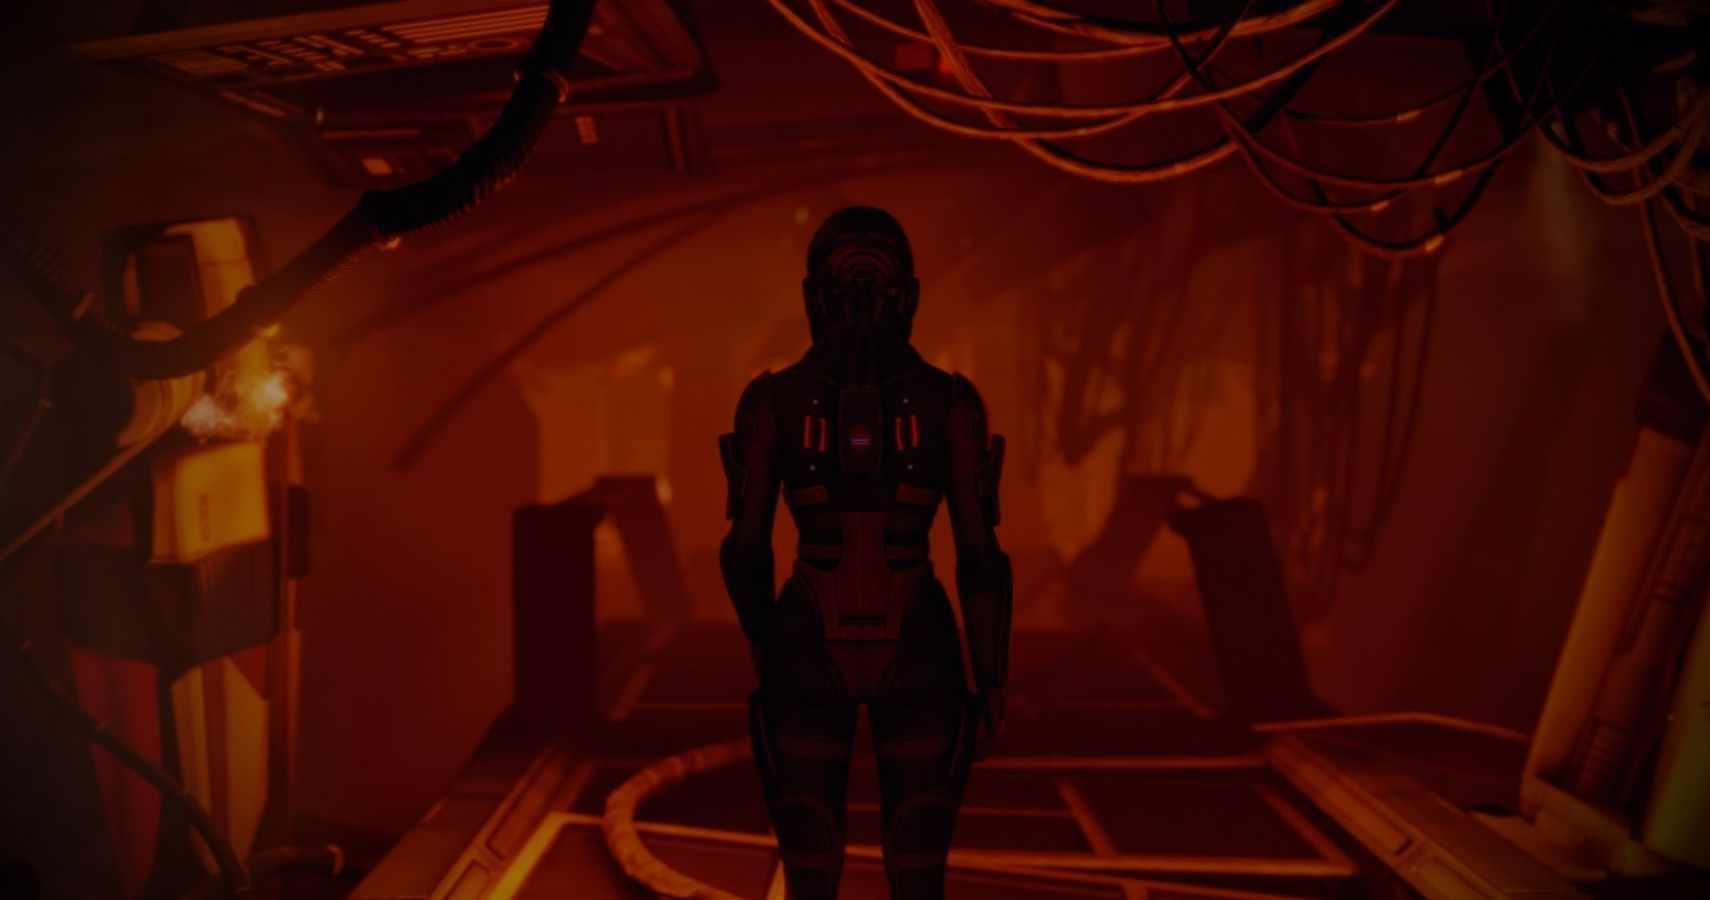 Commander Shepard, a solider, is in a space suit, standing in space ship that is under attack